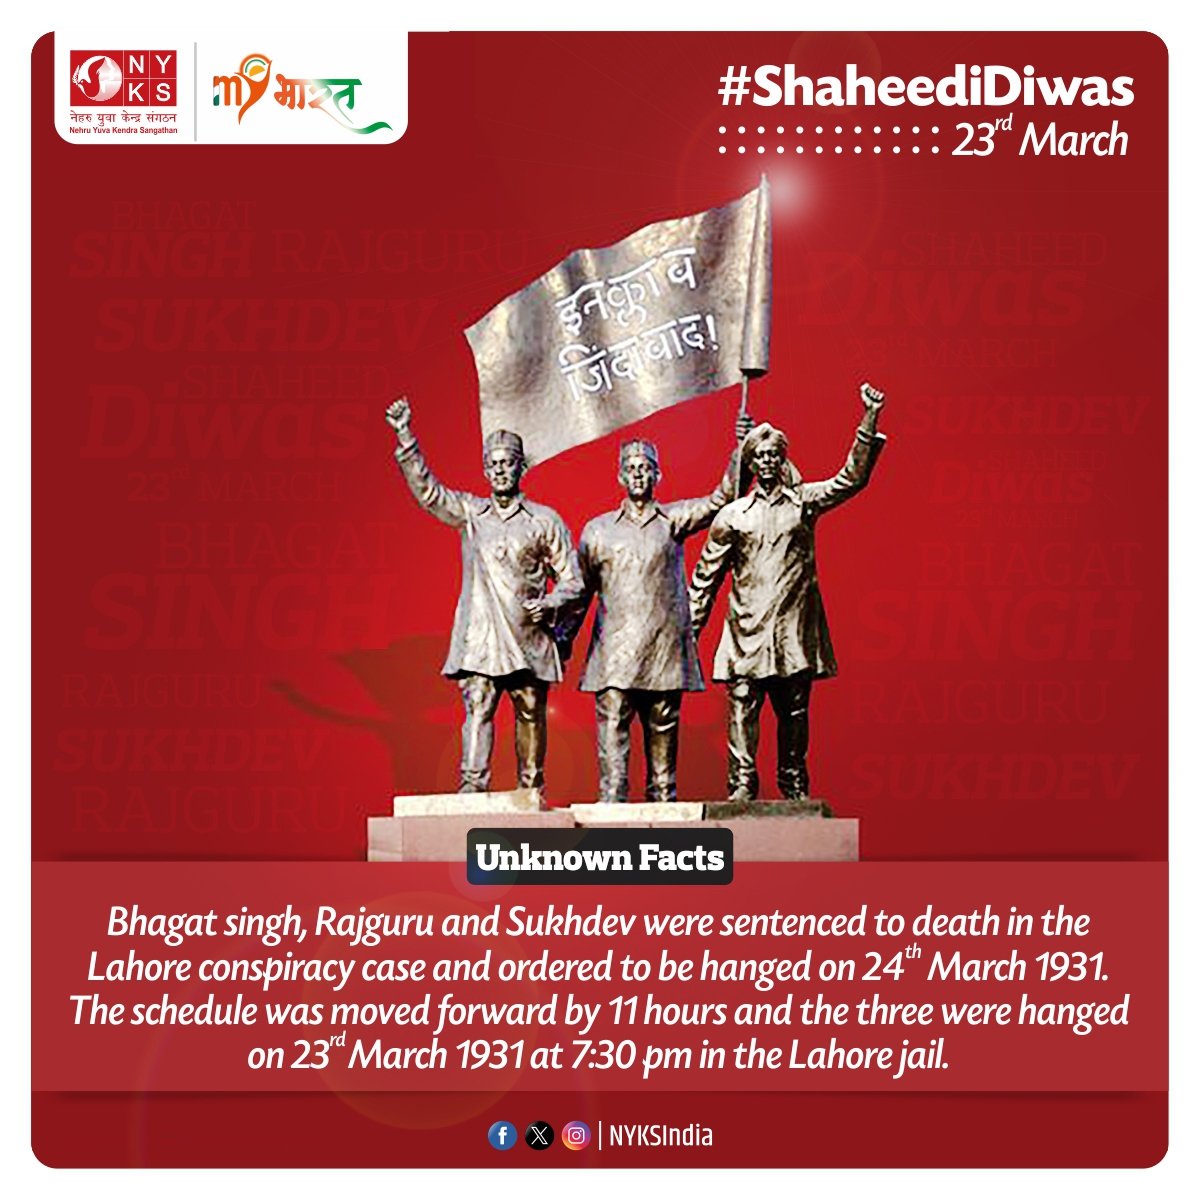 On March 23, 1931, Bhagat Singh, Rajguru, and Sukhdev were martyred for their unwavering commitment to India's freedom. Let's honor their sacrifice and remember their courage as we continue to strive for justice and equality. #MartyrsDay #ShaheedDiwas2024 #ShaheedBhagatSingh